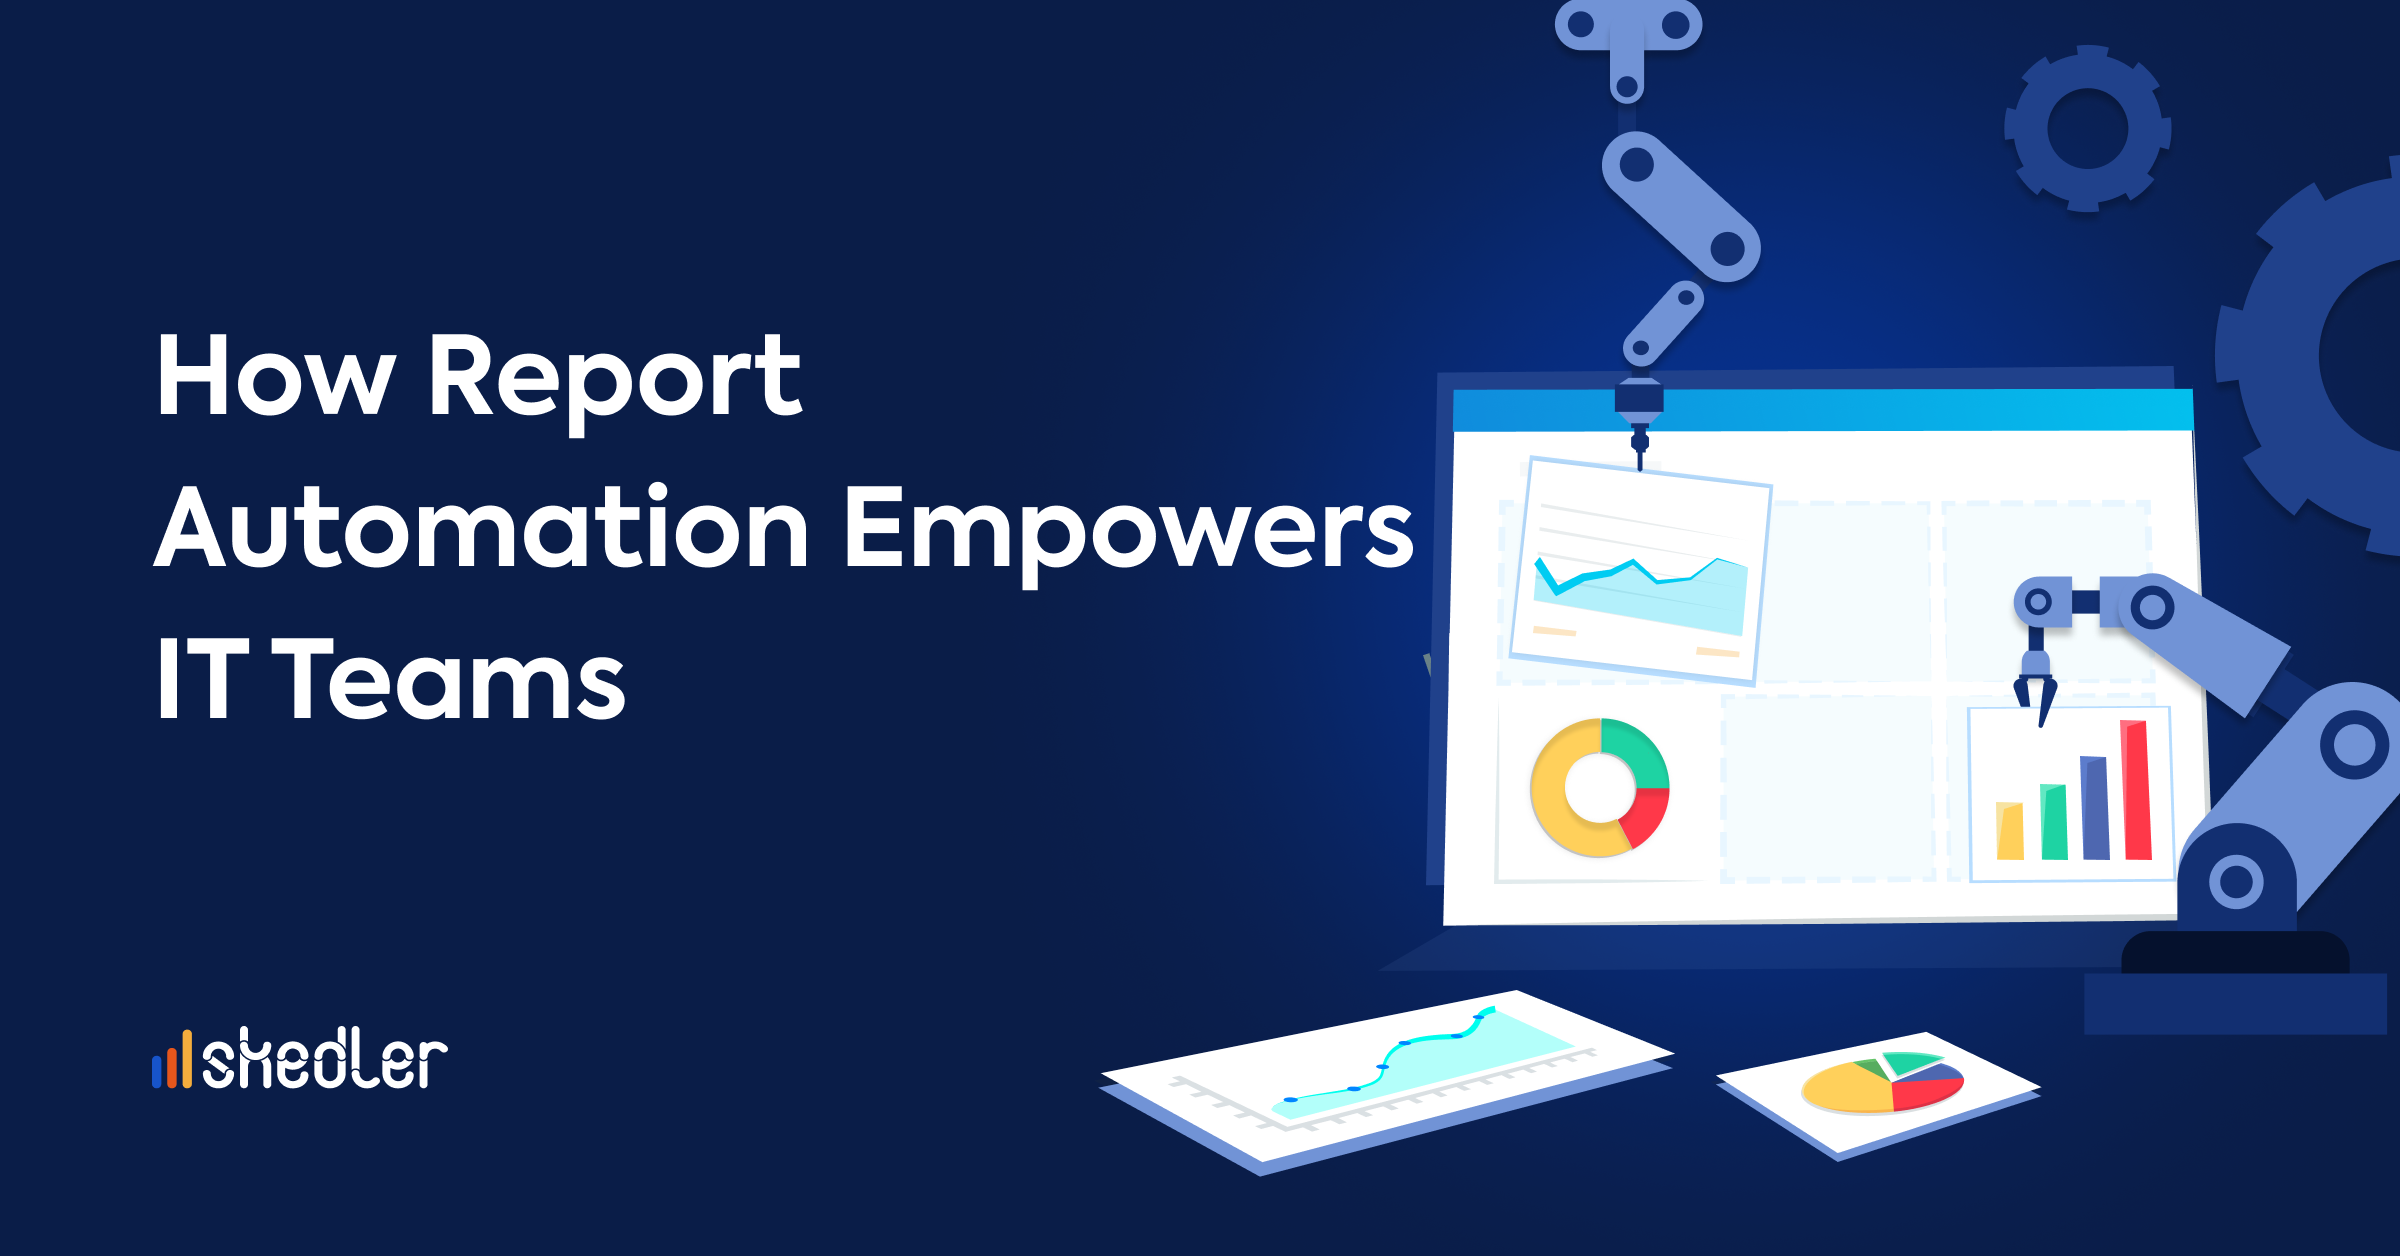 Skedler: How Report Automation Empowers IT Teams